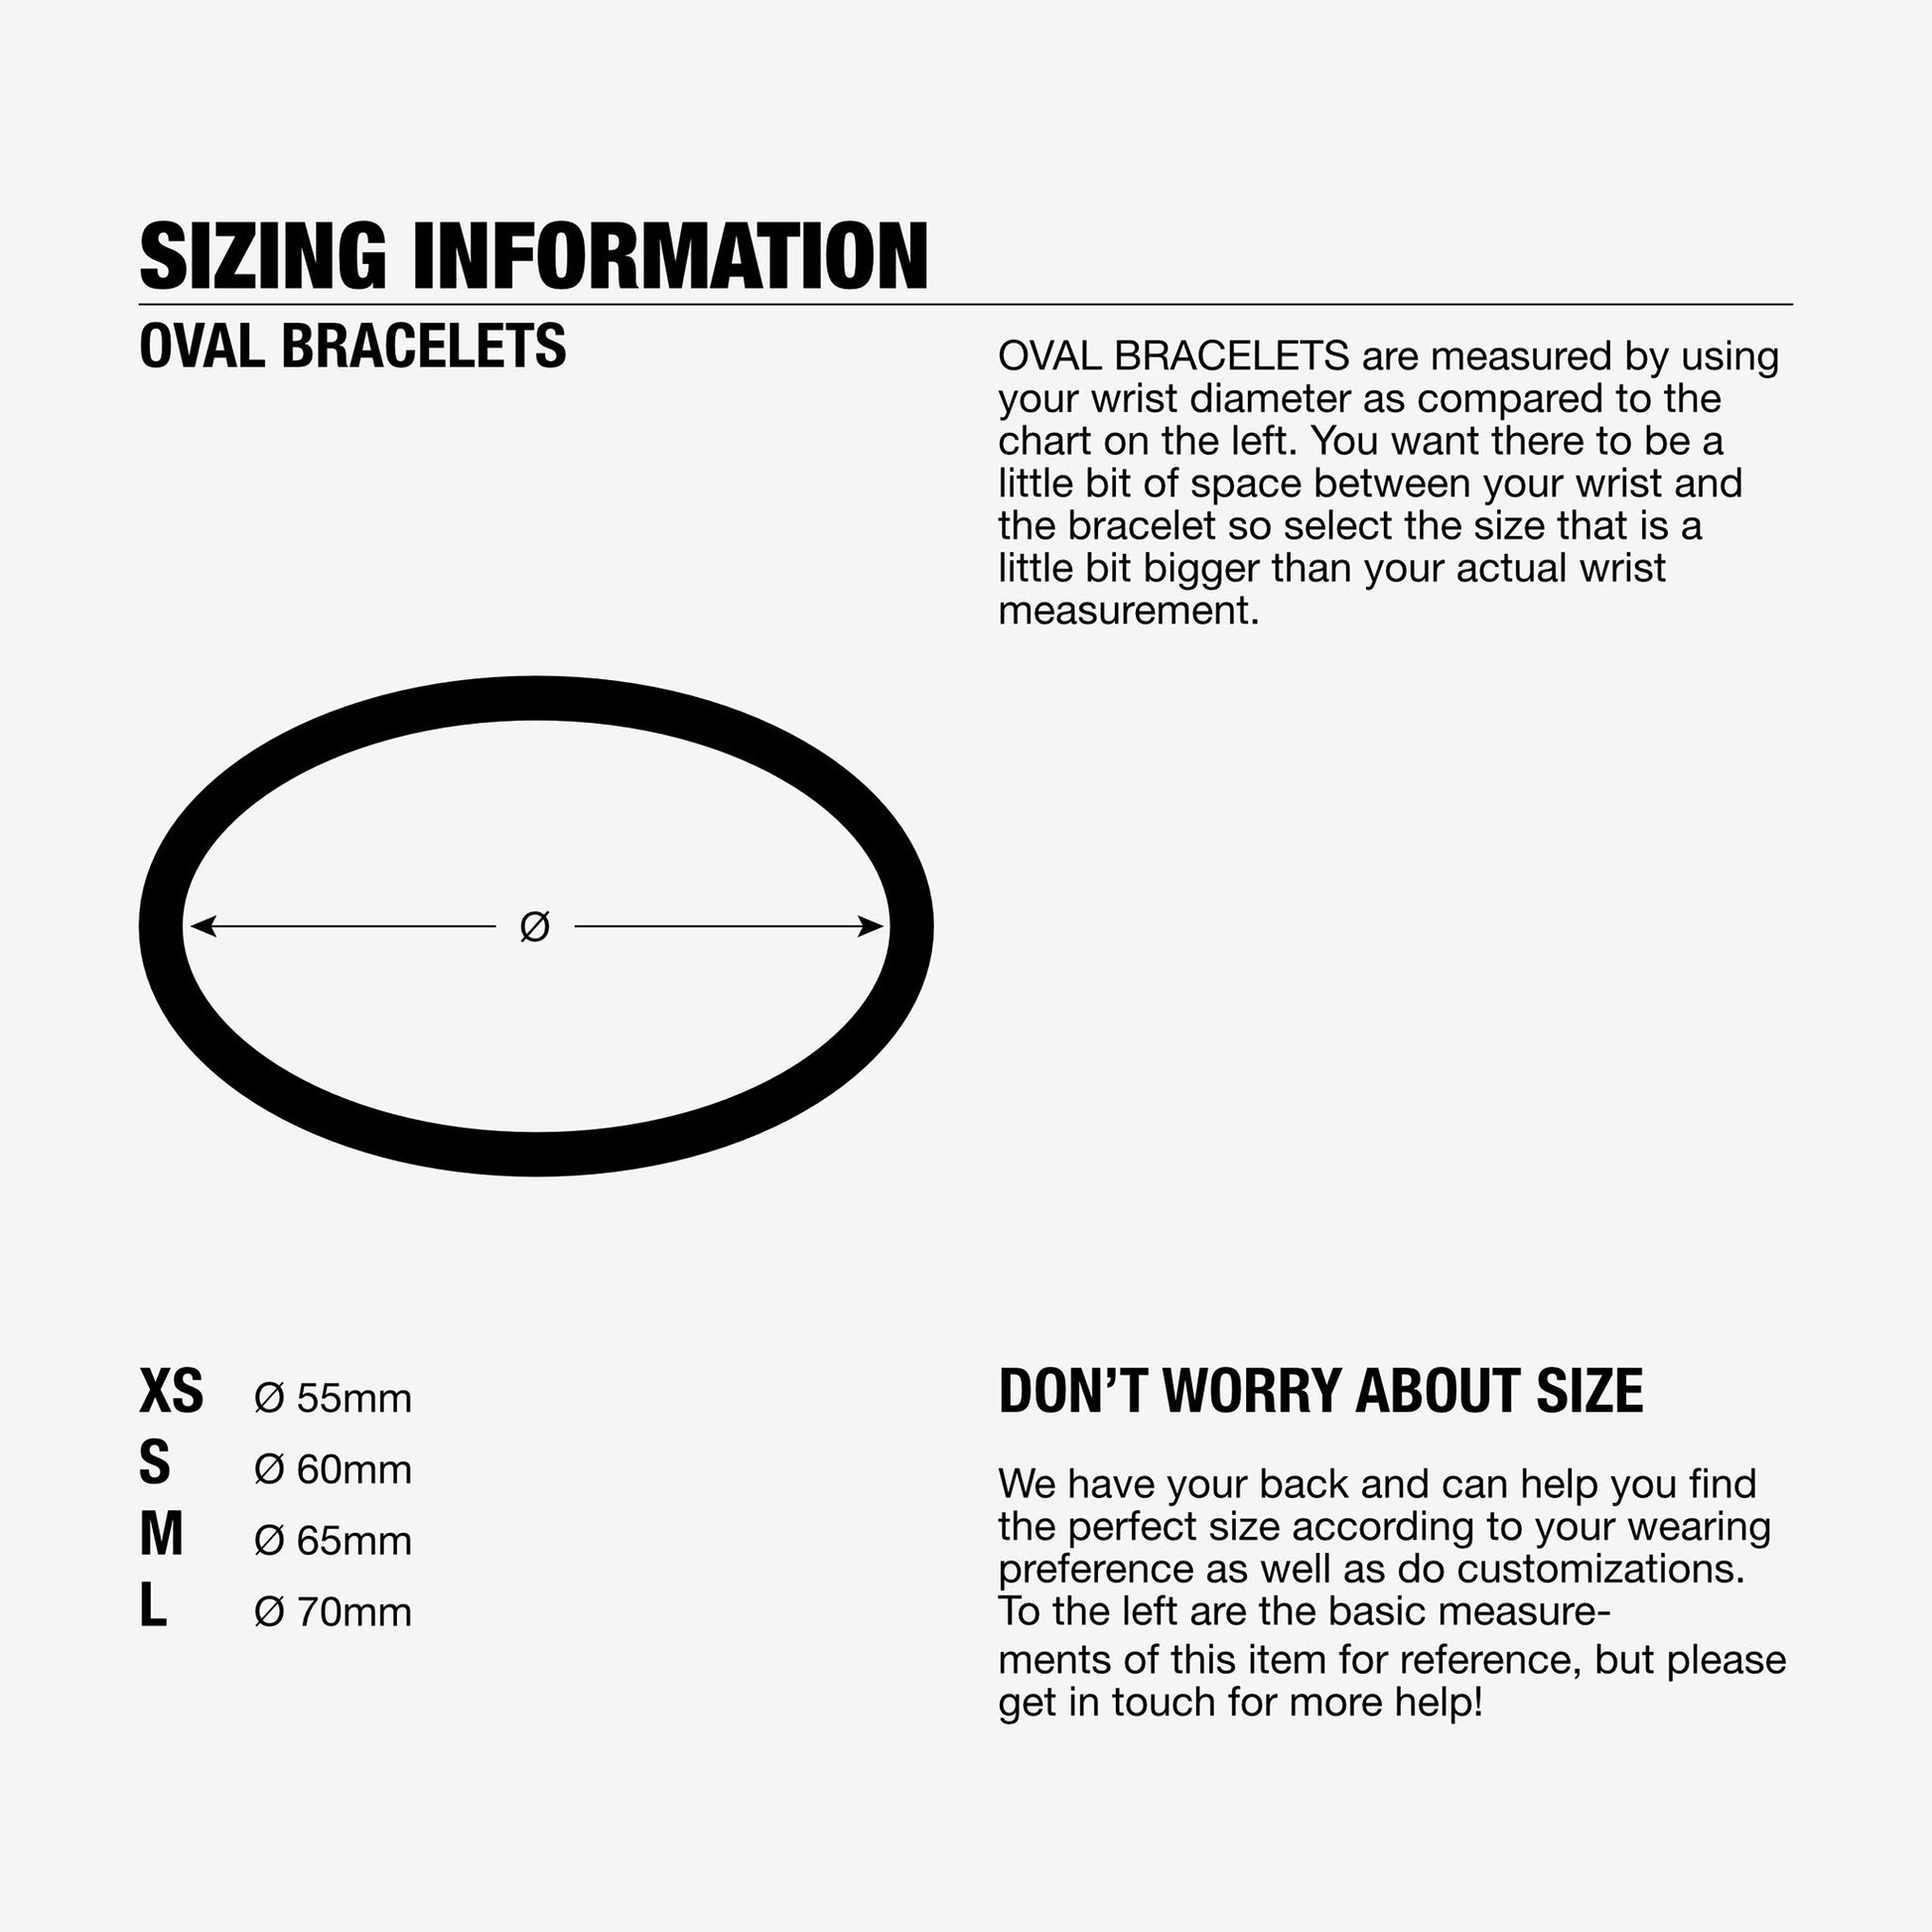 Oval Bracelets are measured by using your wrist diameter. Sizing information for bracelets, 55mm diameter 60mm diameter, 65mm diameter or 70mm diameter.